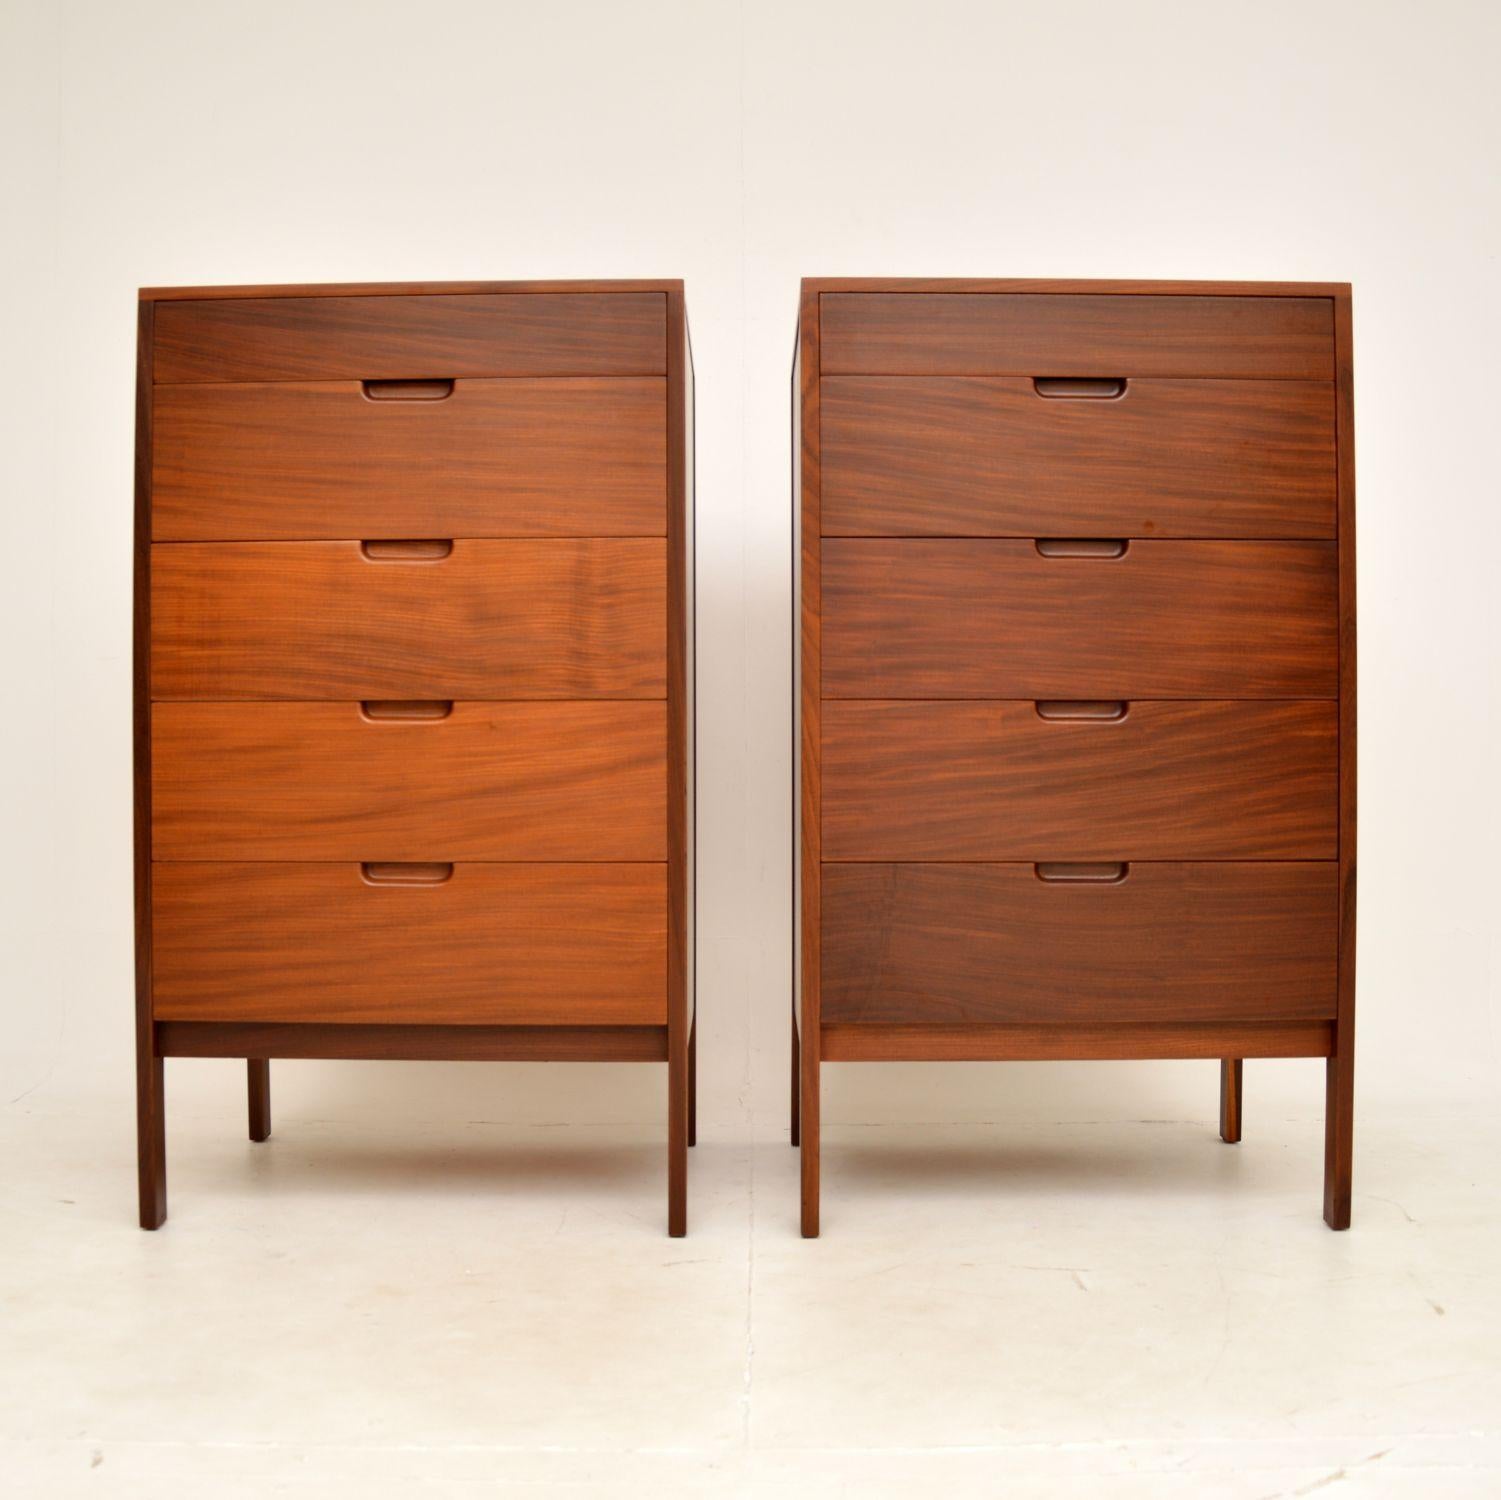 A stylish and extremely rare pair of vintage tallboy chest of drawers. They were made in England, and were designed by Richard Hornby for Heals as part of the Fyne Ladye range.

The quality is exceptional and they are beautifully designed, with a